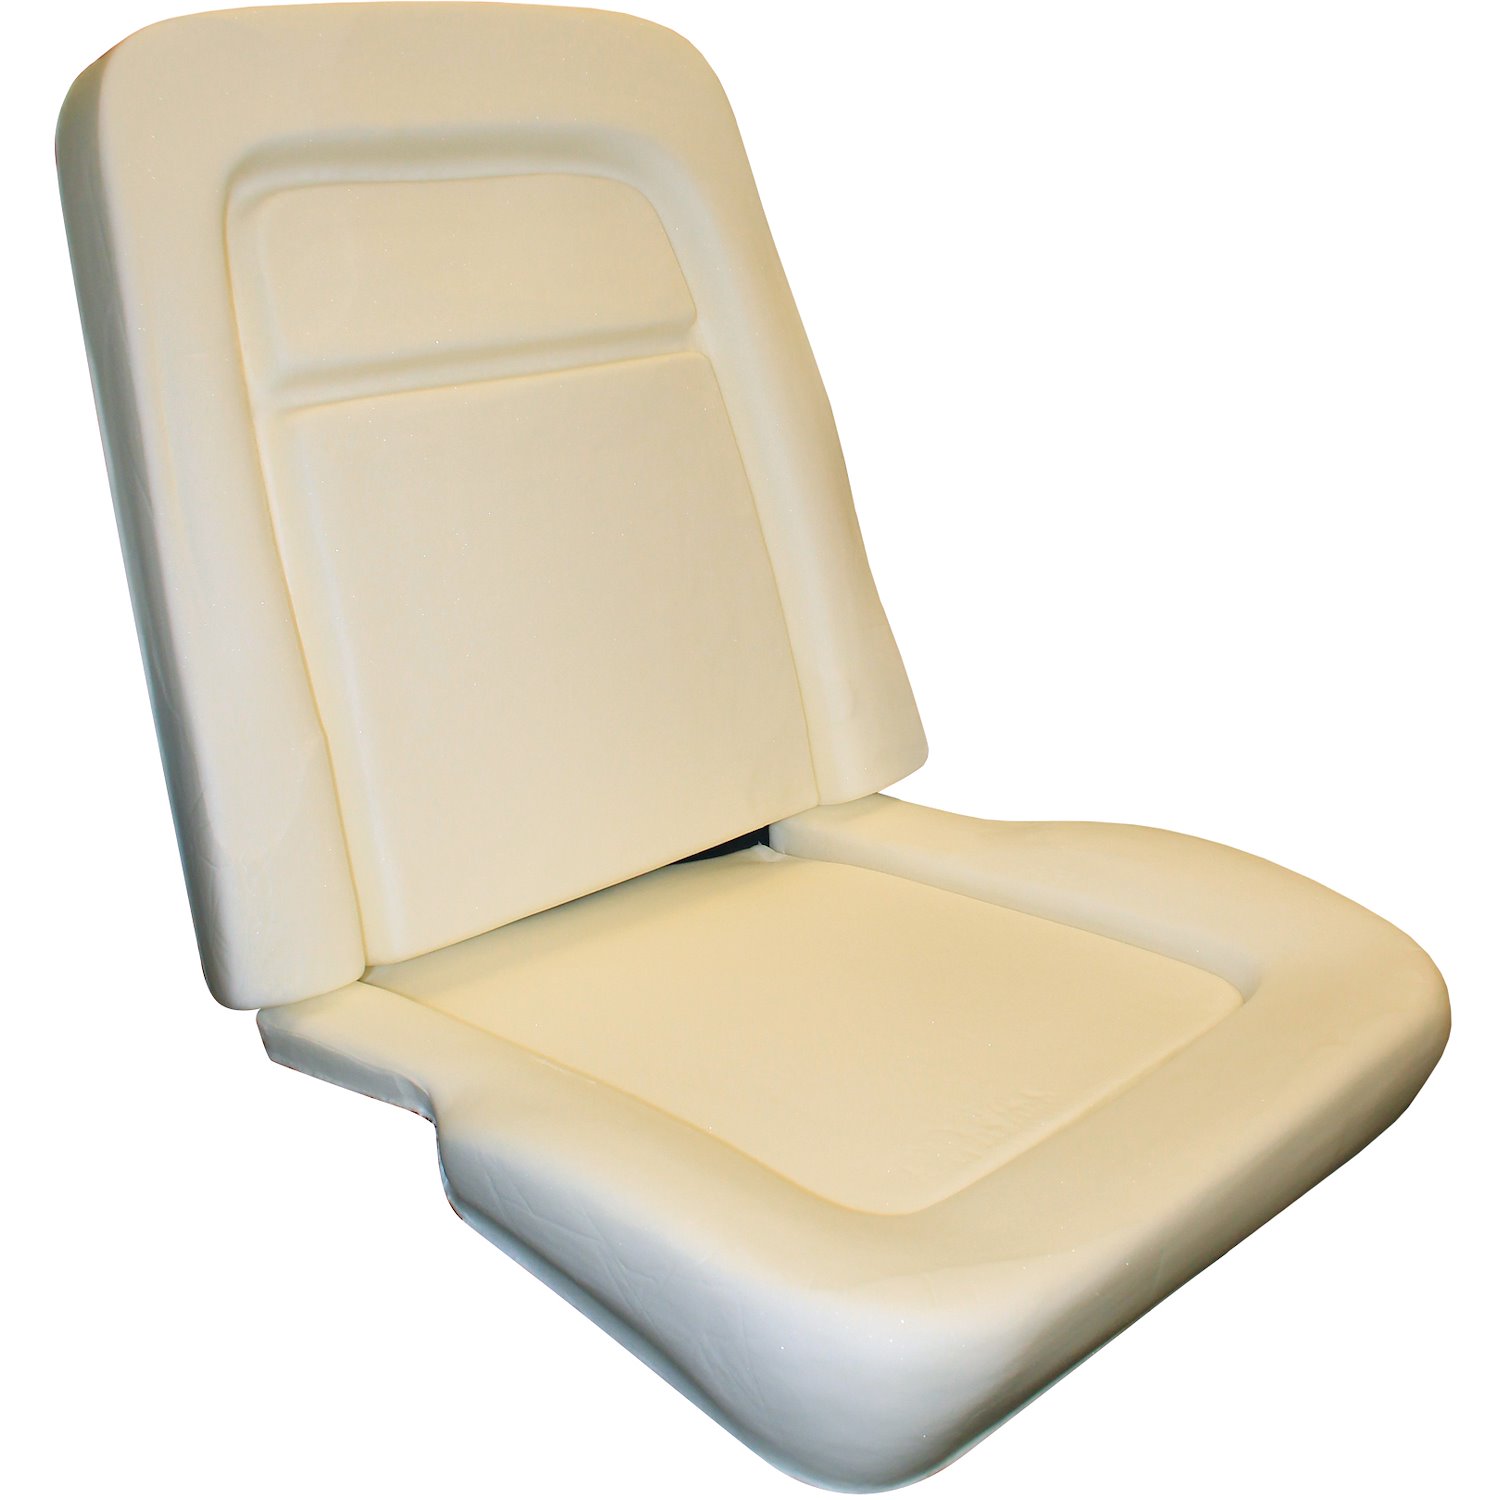 1968 Ford Mustang Standard Interior Front Bucket Seat